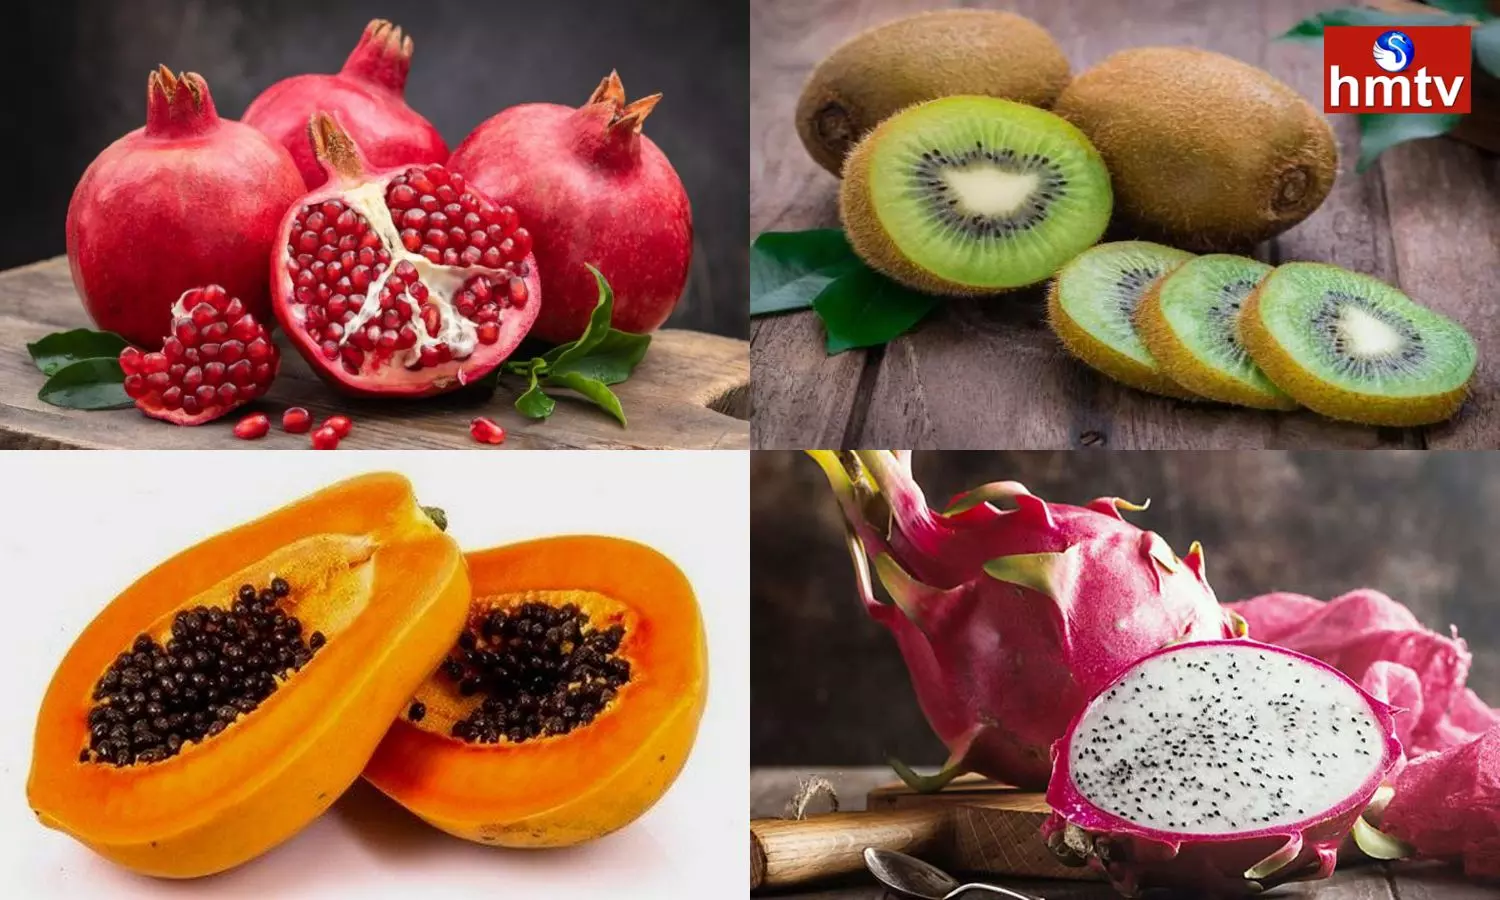 To recover from dengue these fruits must be eaten should definitely be included in the diet